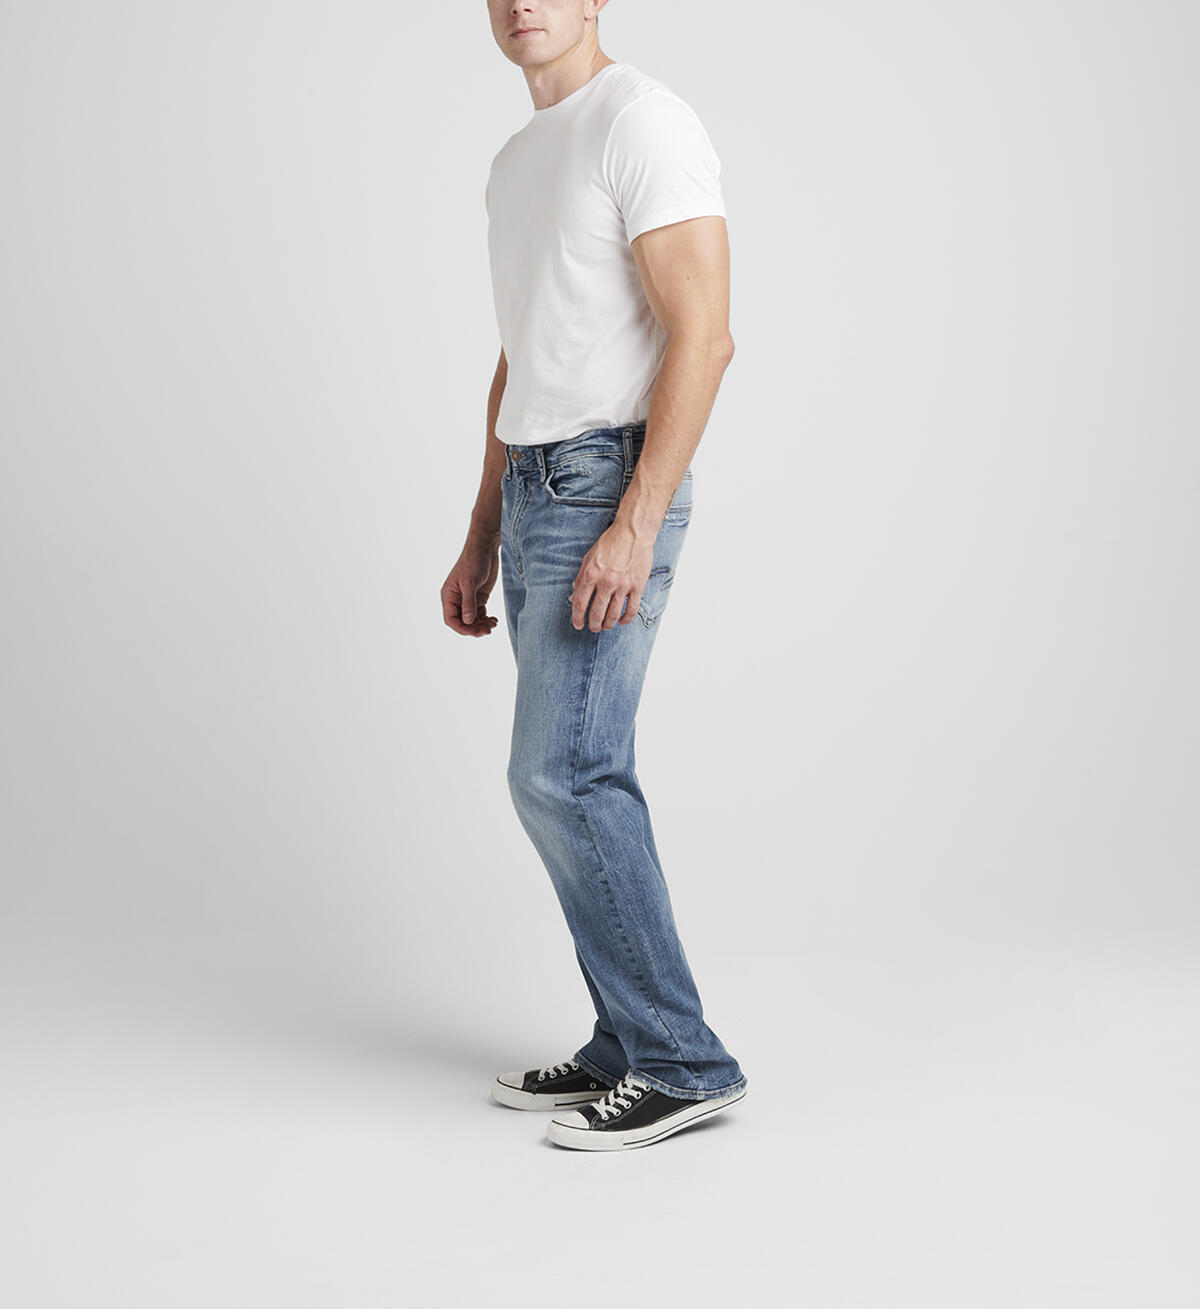 Grayson Easy Fit Straight Leg Jeans, , hi-res image number 2